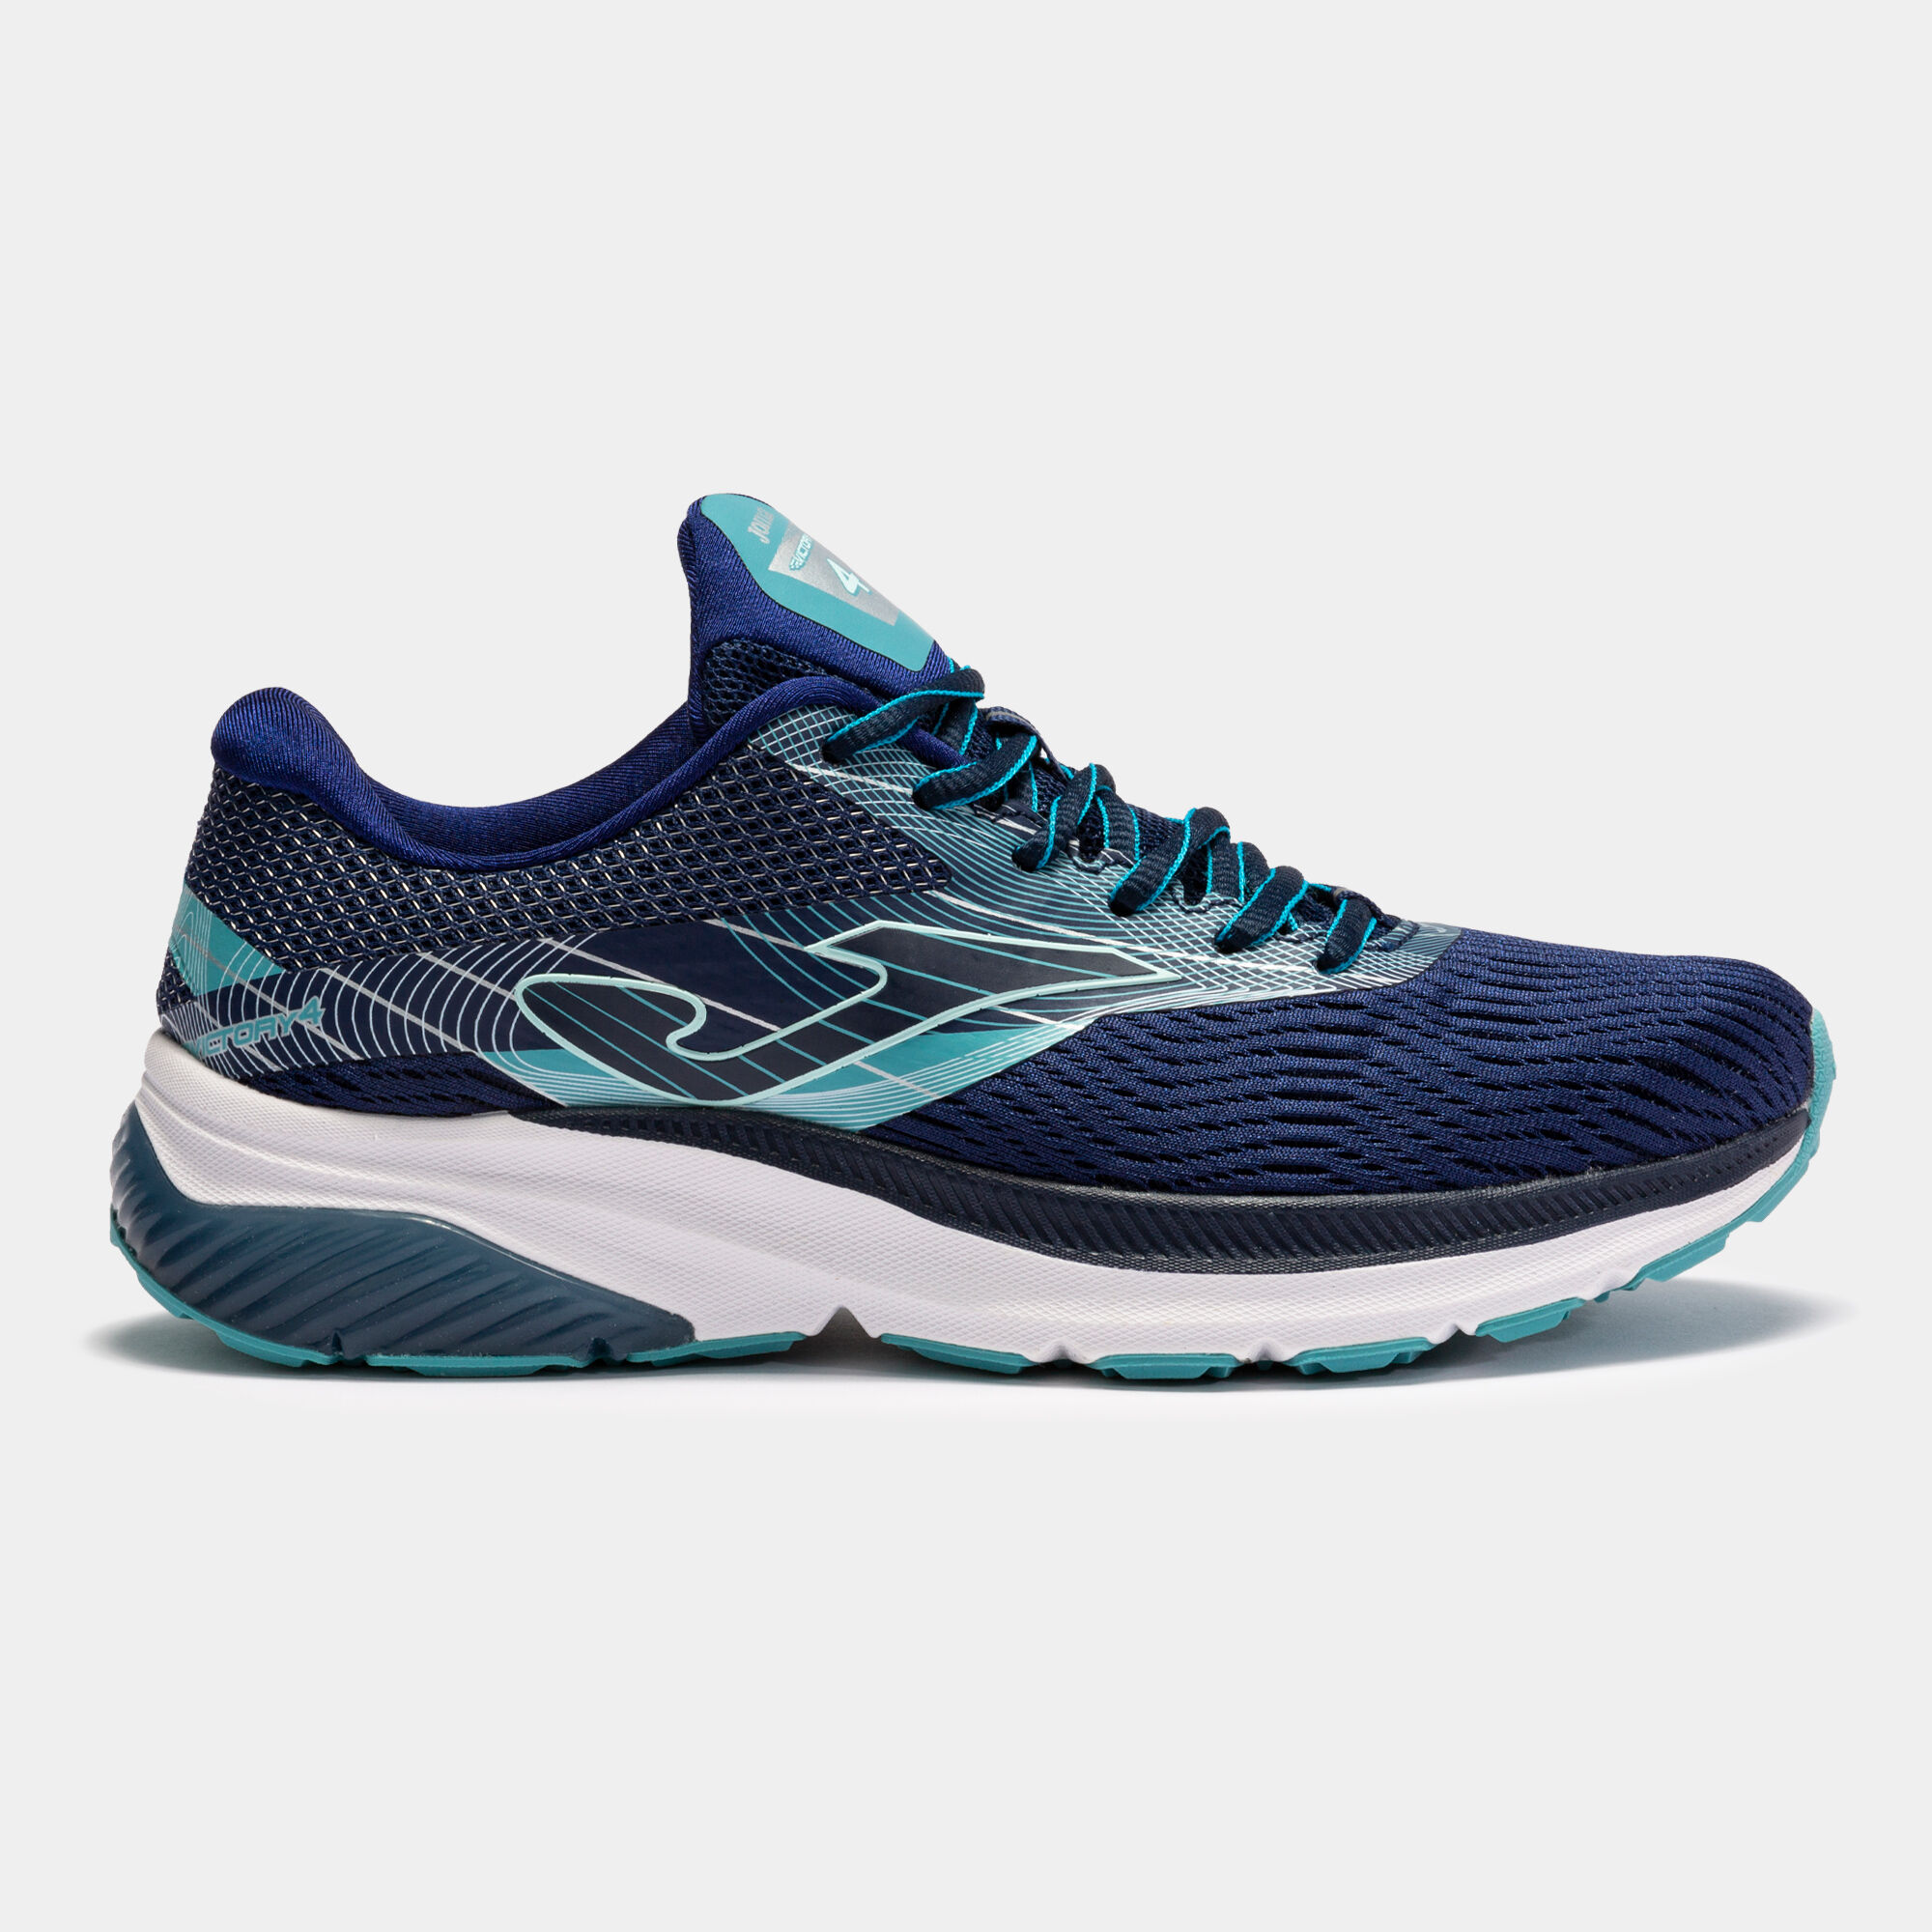 RUNNING SHOES VICTORY 22 WOMAN NAVY BLUE SKY BLUE